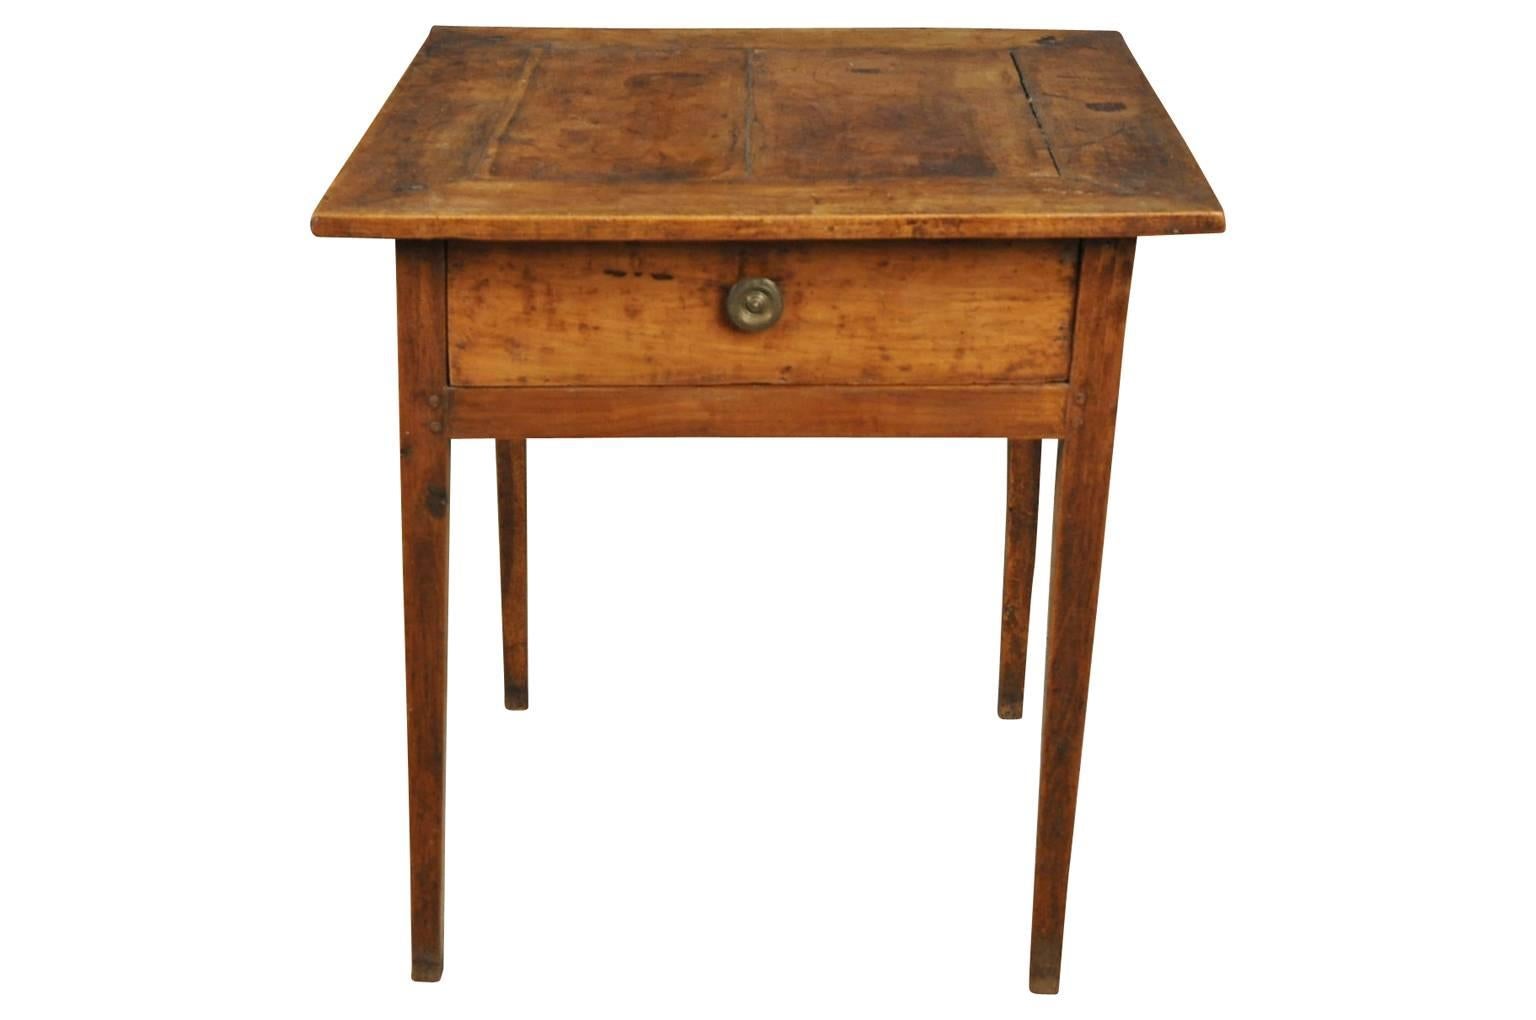 A very handsome early 19th century Directoire period side table from the South of France. Beautifully constructed from walnut - fabulous patina.